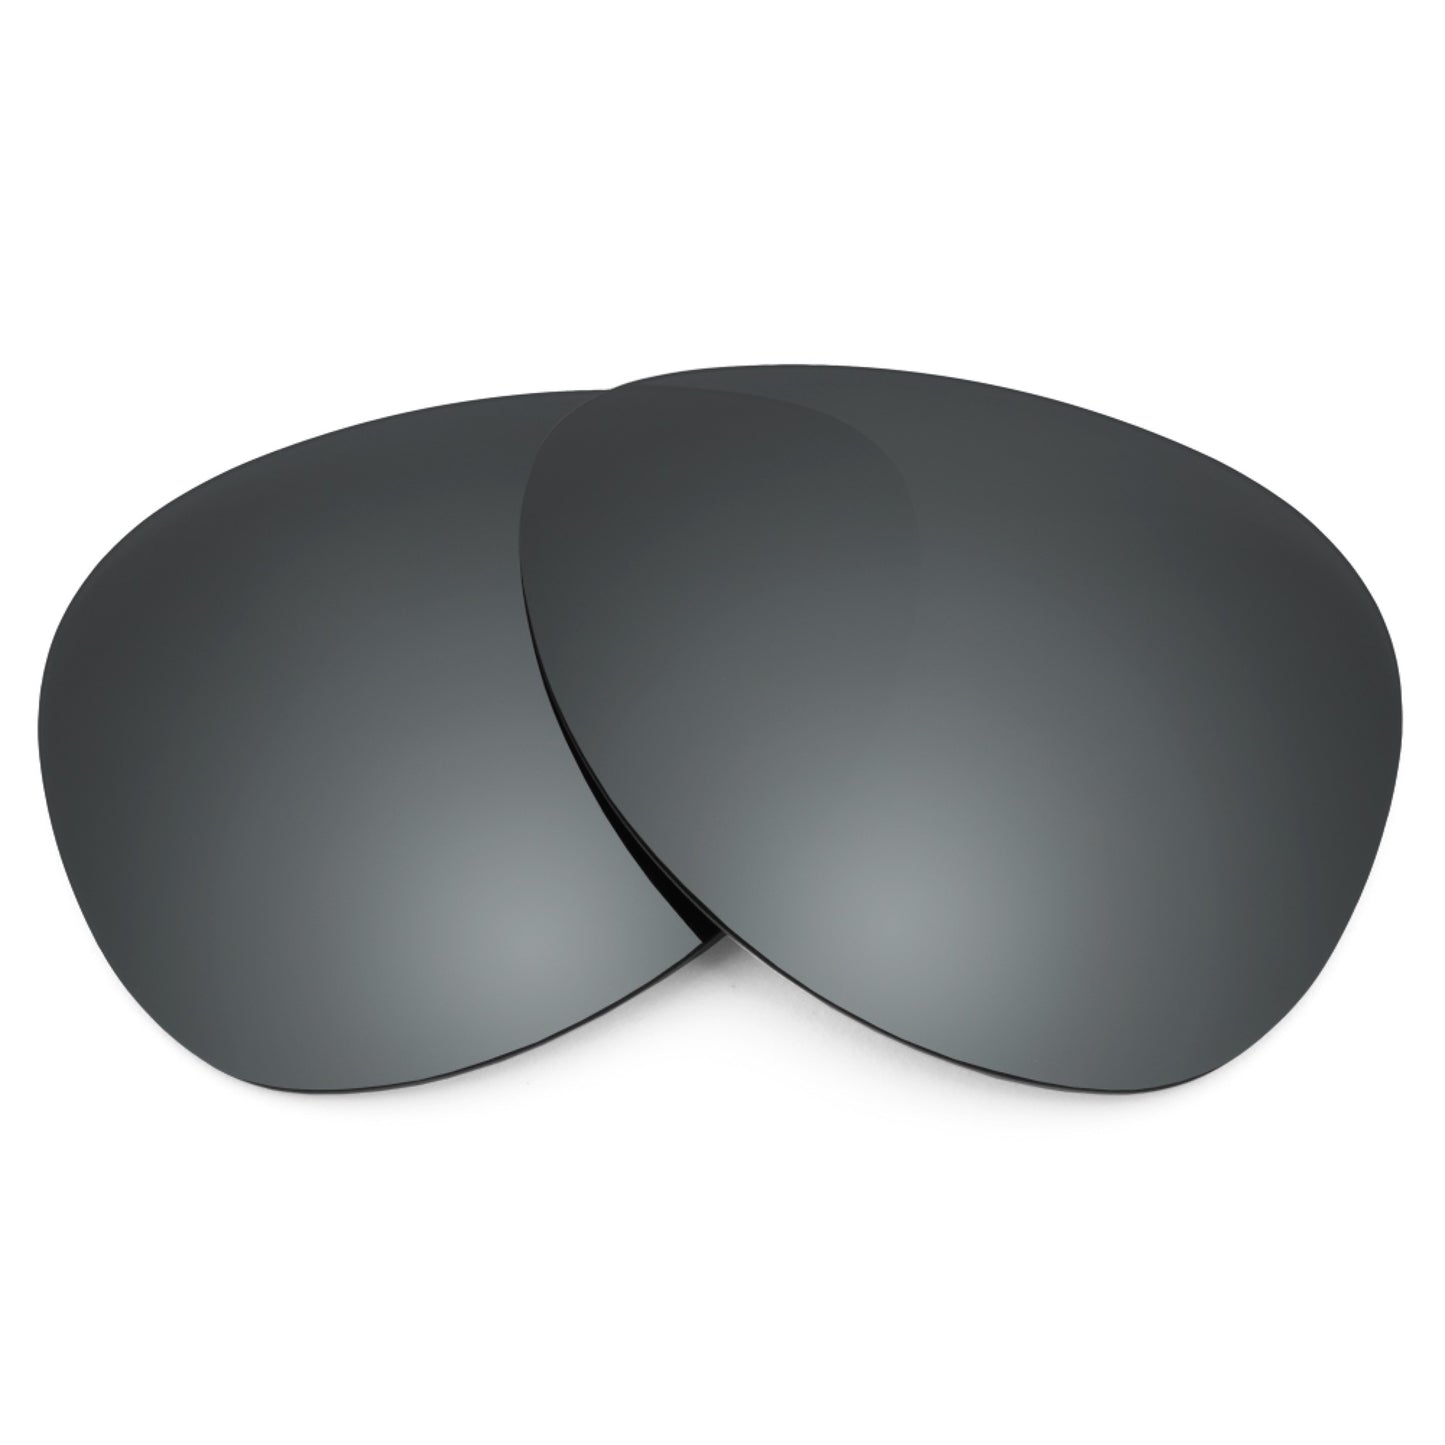 Revant replacement lenses for Ray-Ban RB3386 63mm Non-Polarized Black Chrome